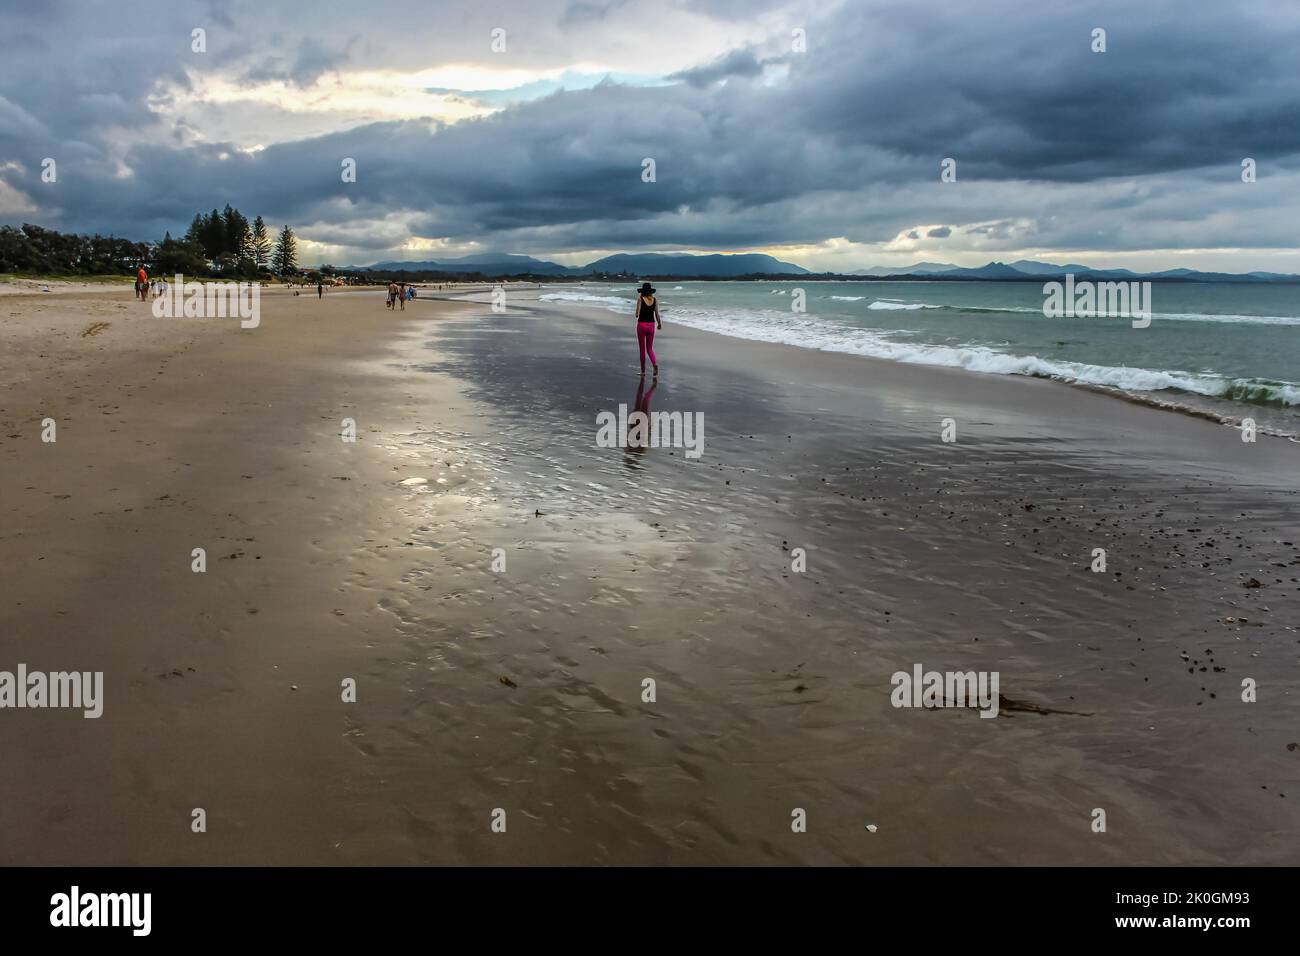 Woman with pink leggings and wide brimmed hat walking along wet beach under stormy skies in Byron Bay Australia with other beach goers and mountains i Stock Photo